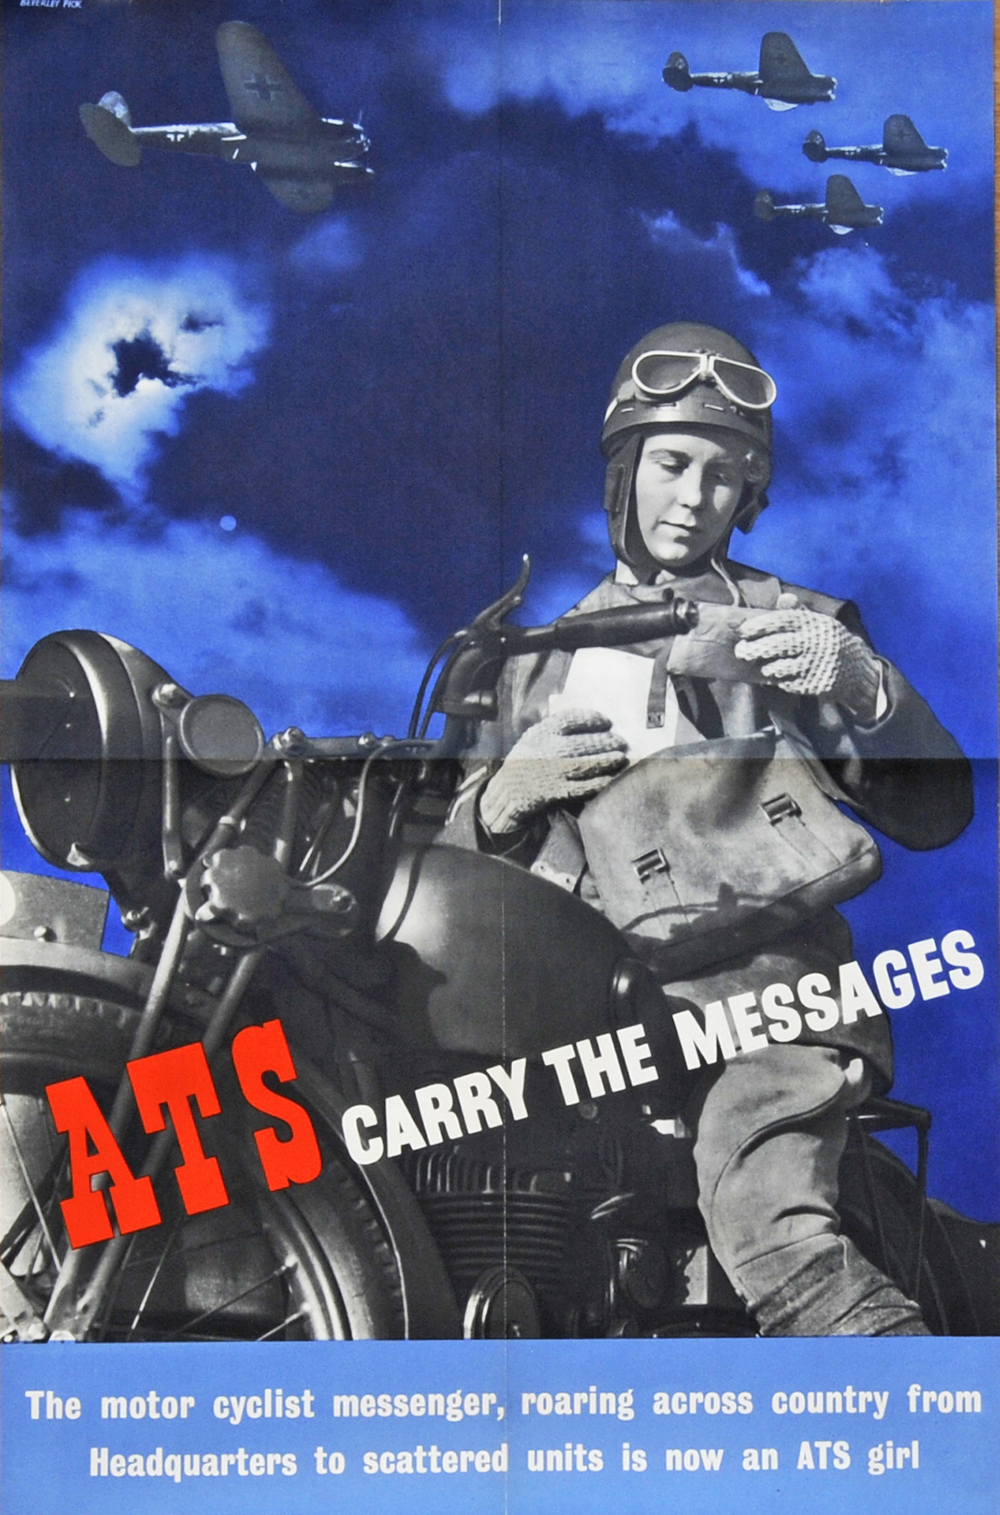 Wartime Poster, 'ATS Carry the Messages - The Motorcyclist Messenger roaring across country from Headquarters to scattered units is now an ATS girl'. Depicts a lady ATS motorcyclist with German bombers in the air above